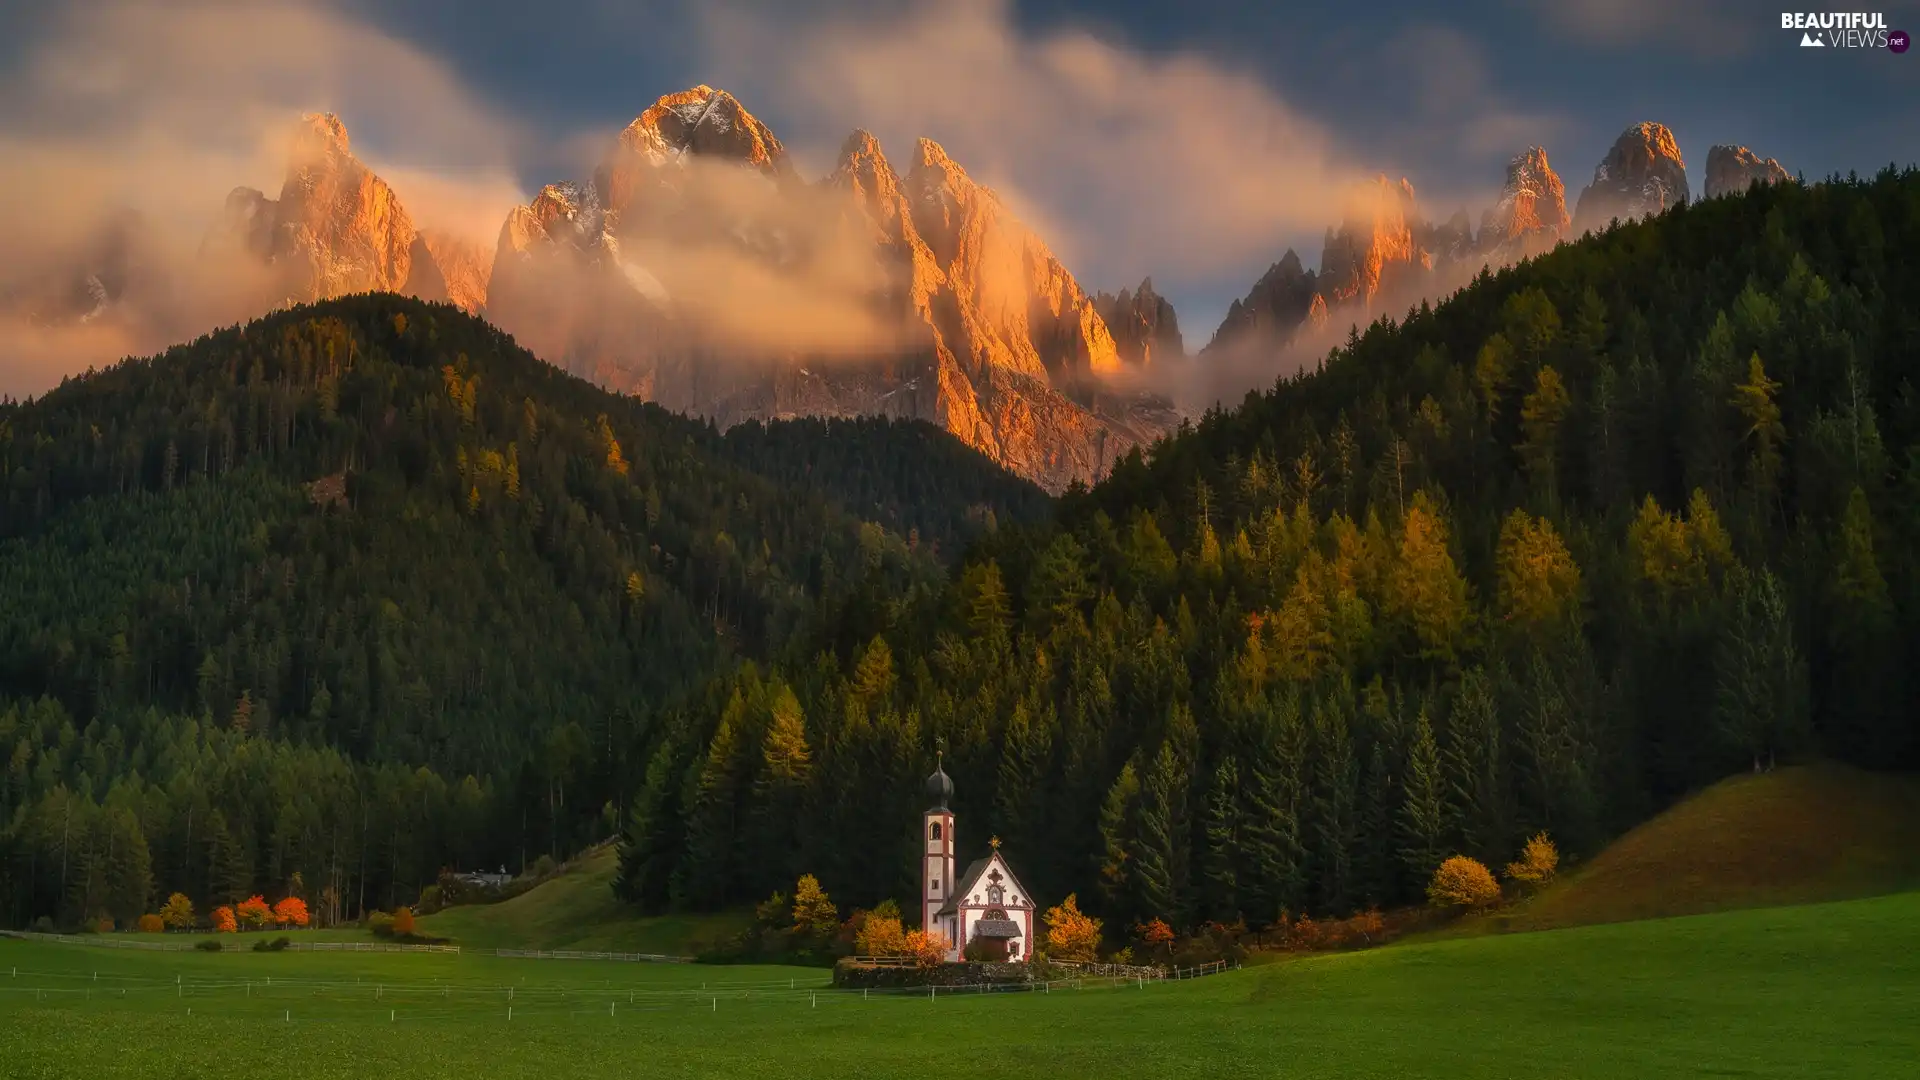 Val di Funes Valley, forest, Dolomites, Fog, Church of St. John, Mountains, Italy